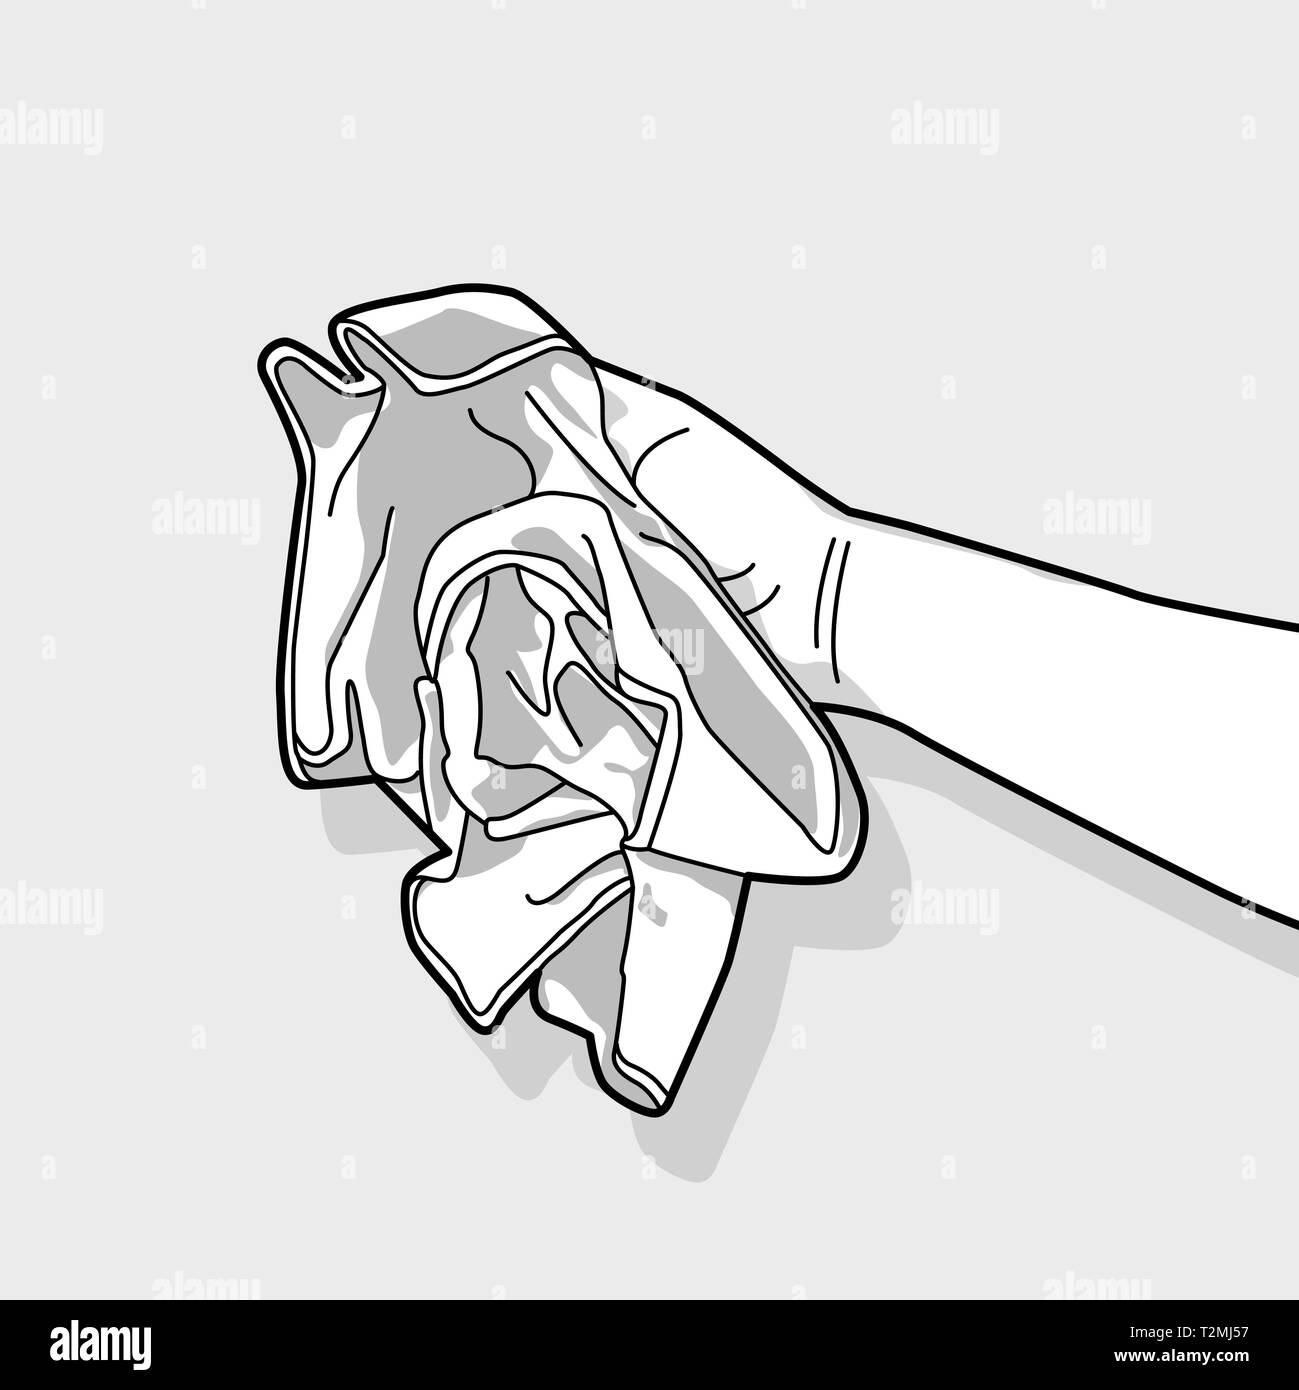 Hand holds the microfiber cloths for wiping. Stock Vector